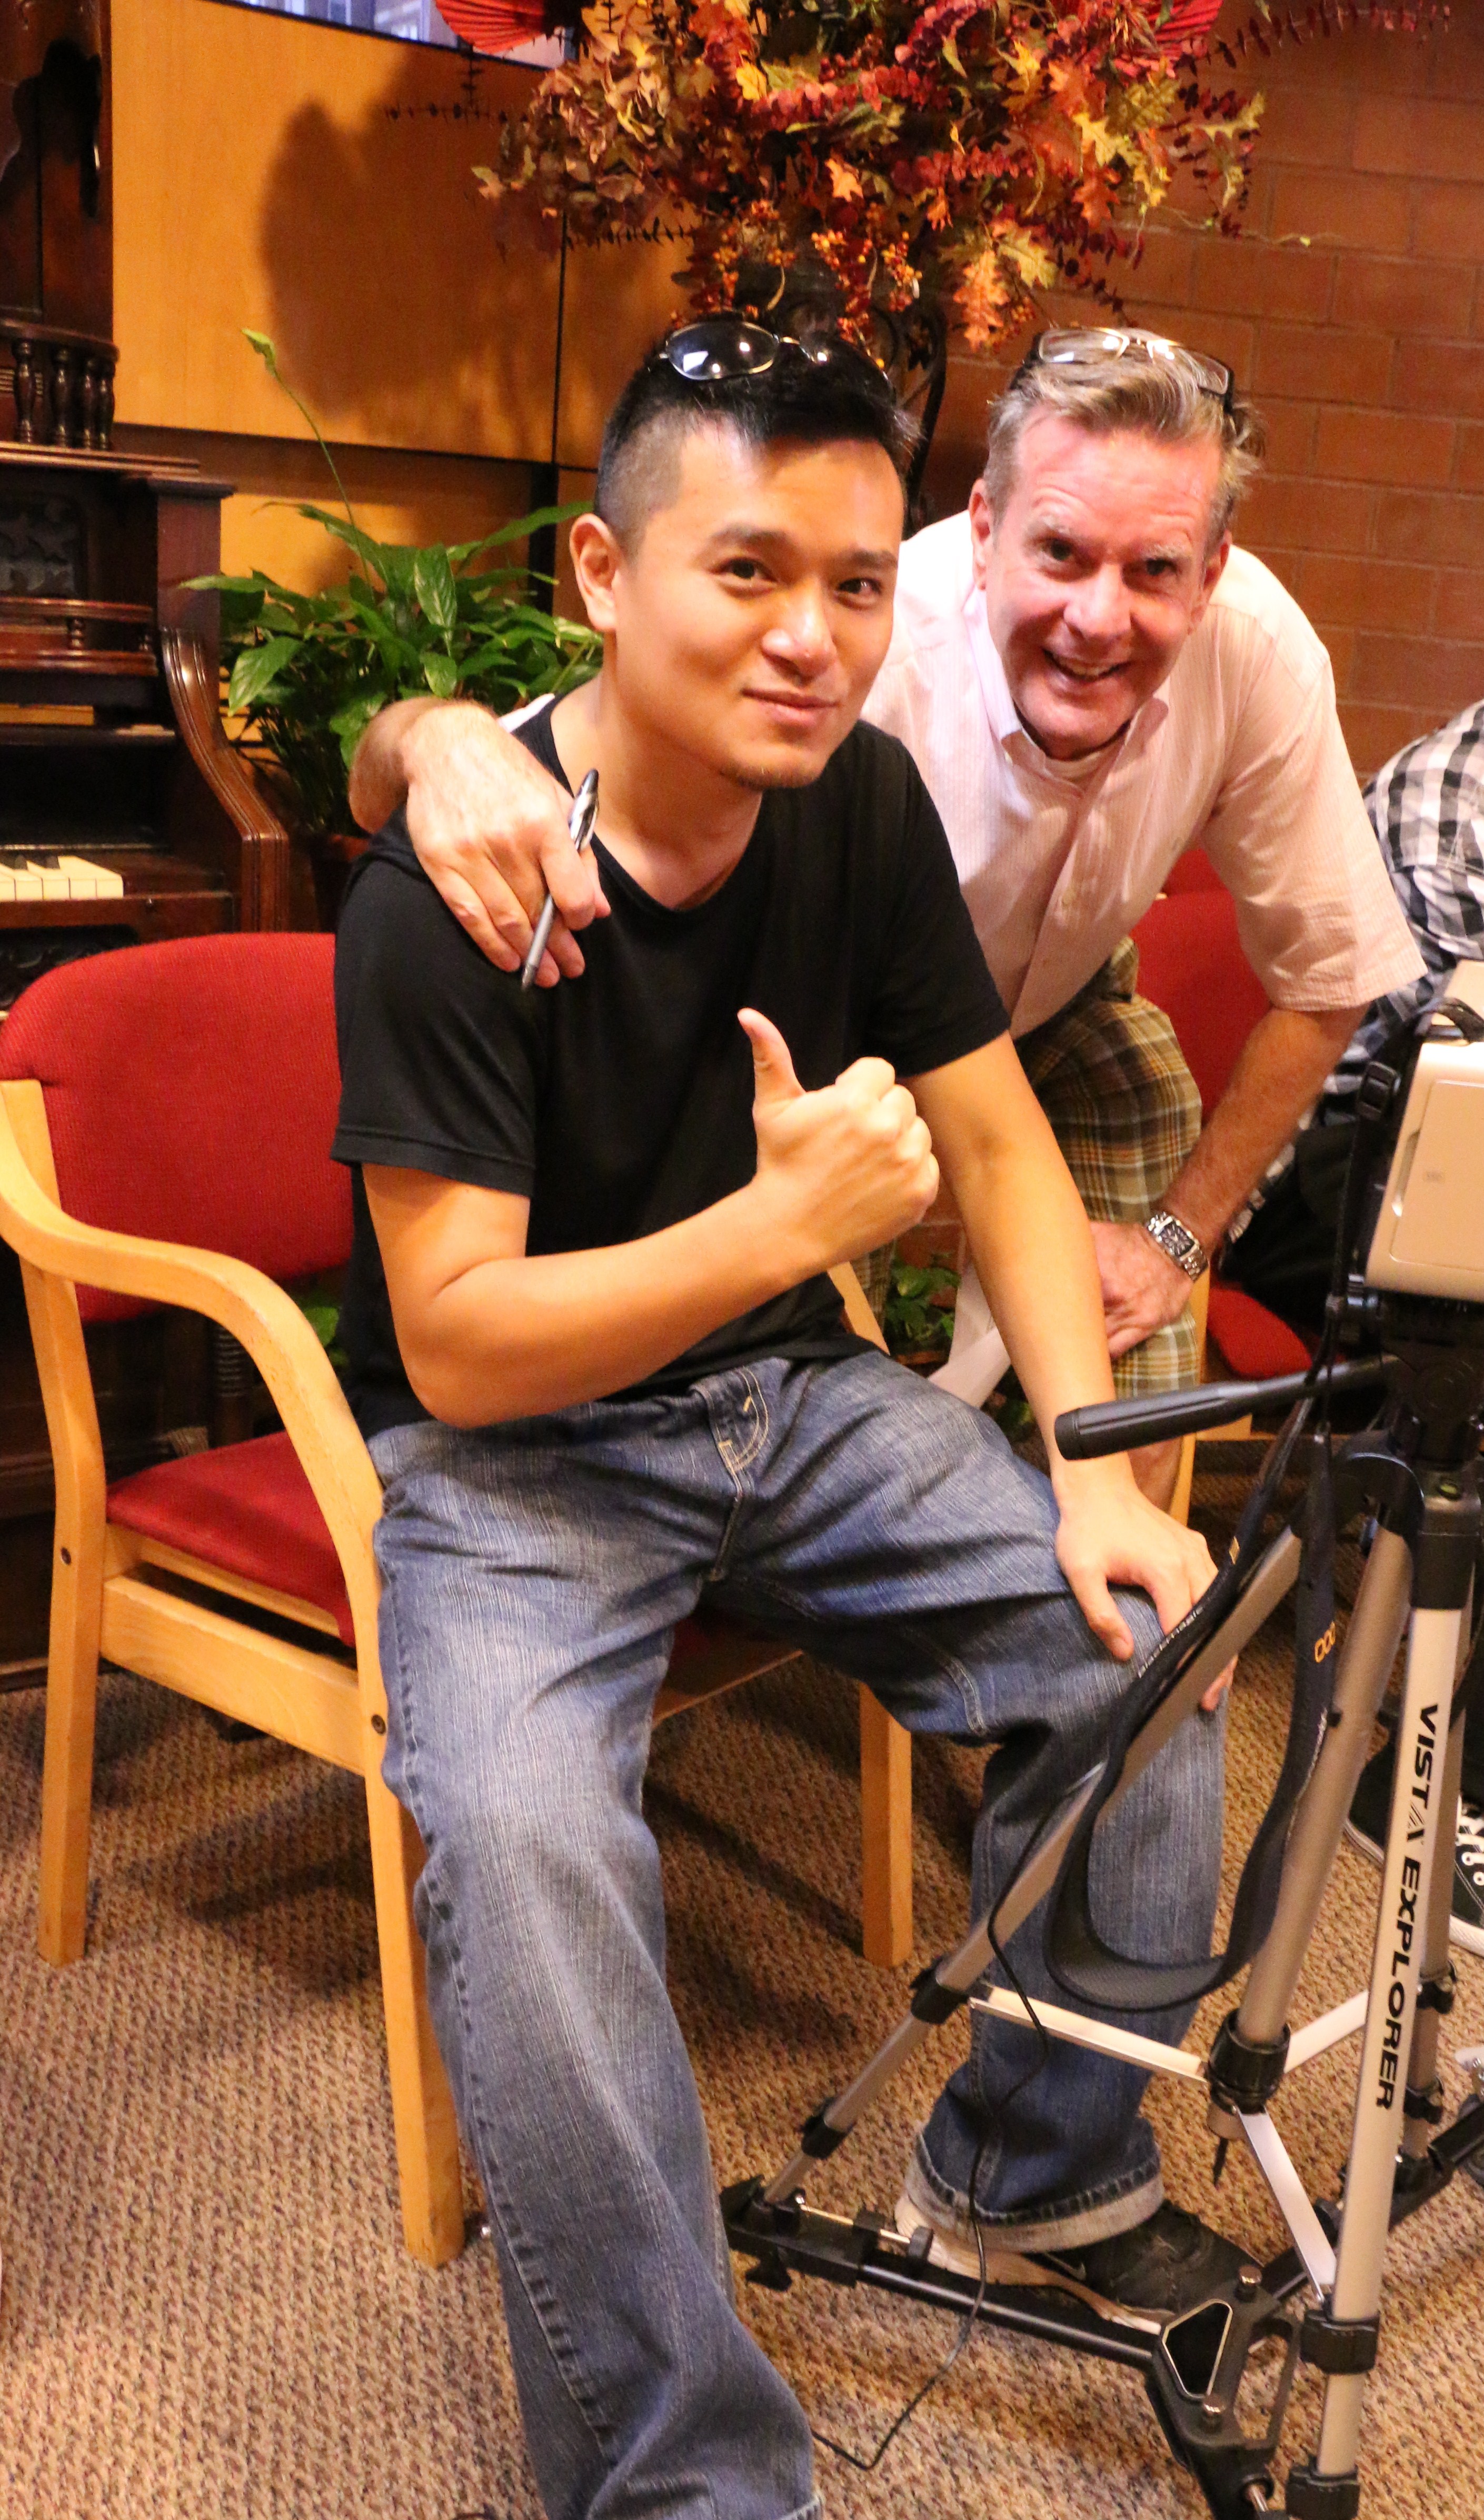 With Kyle J. Tran, Director of Photography.